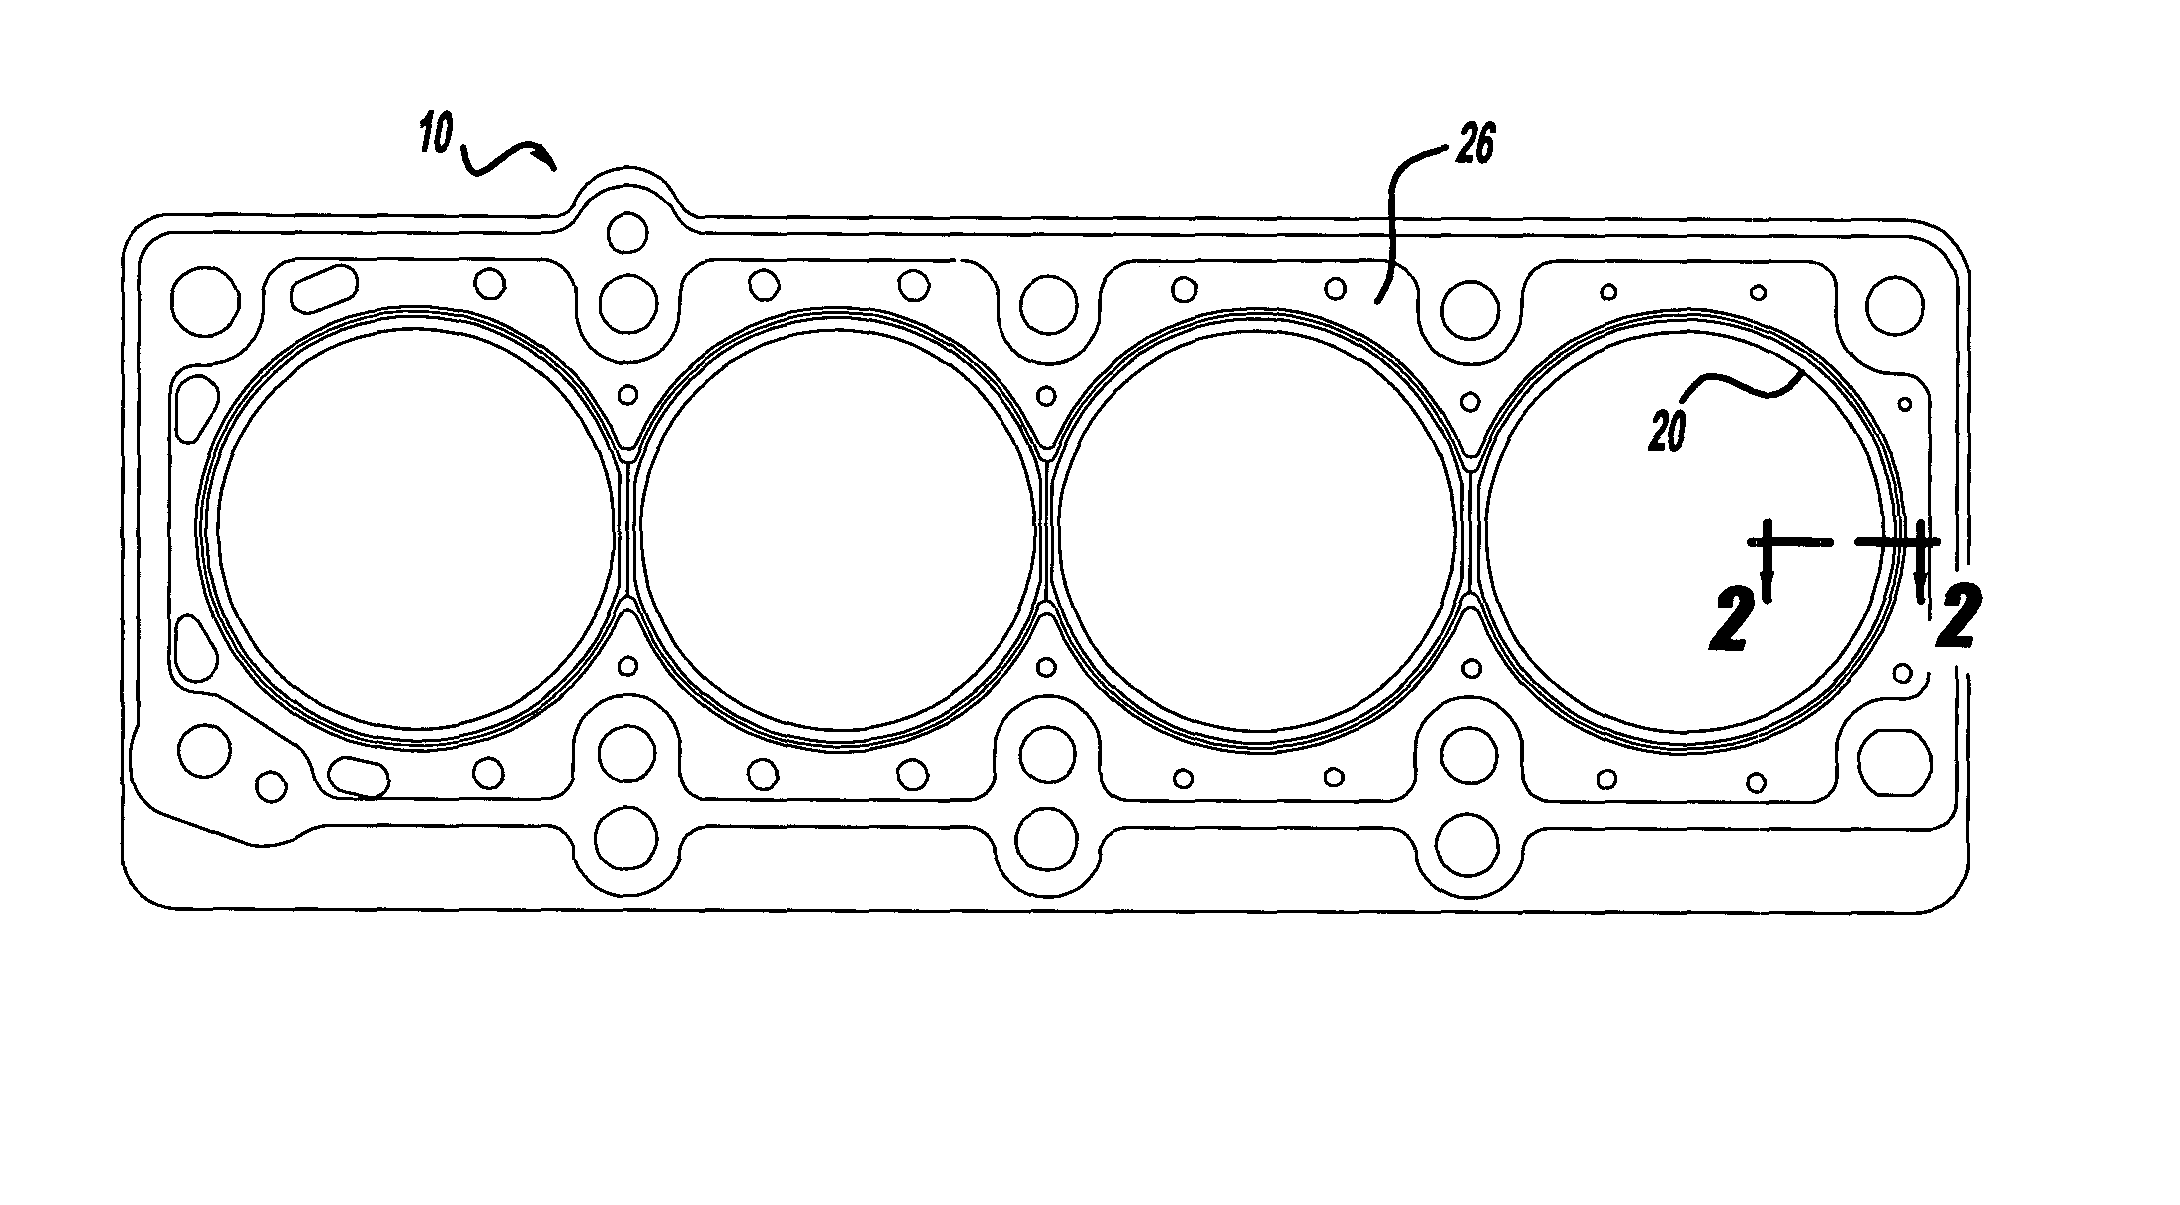 Sealing gasket with flexible stopper